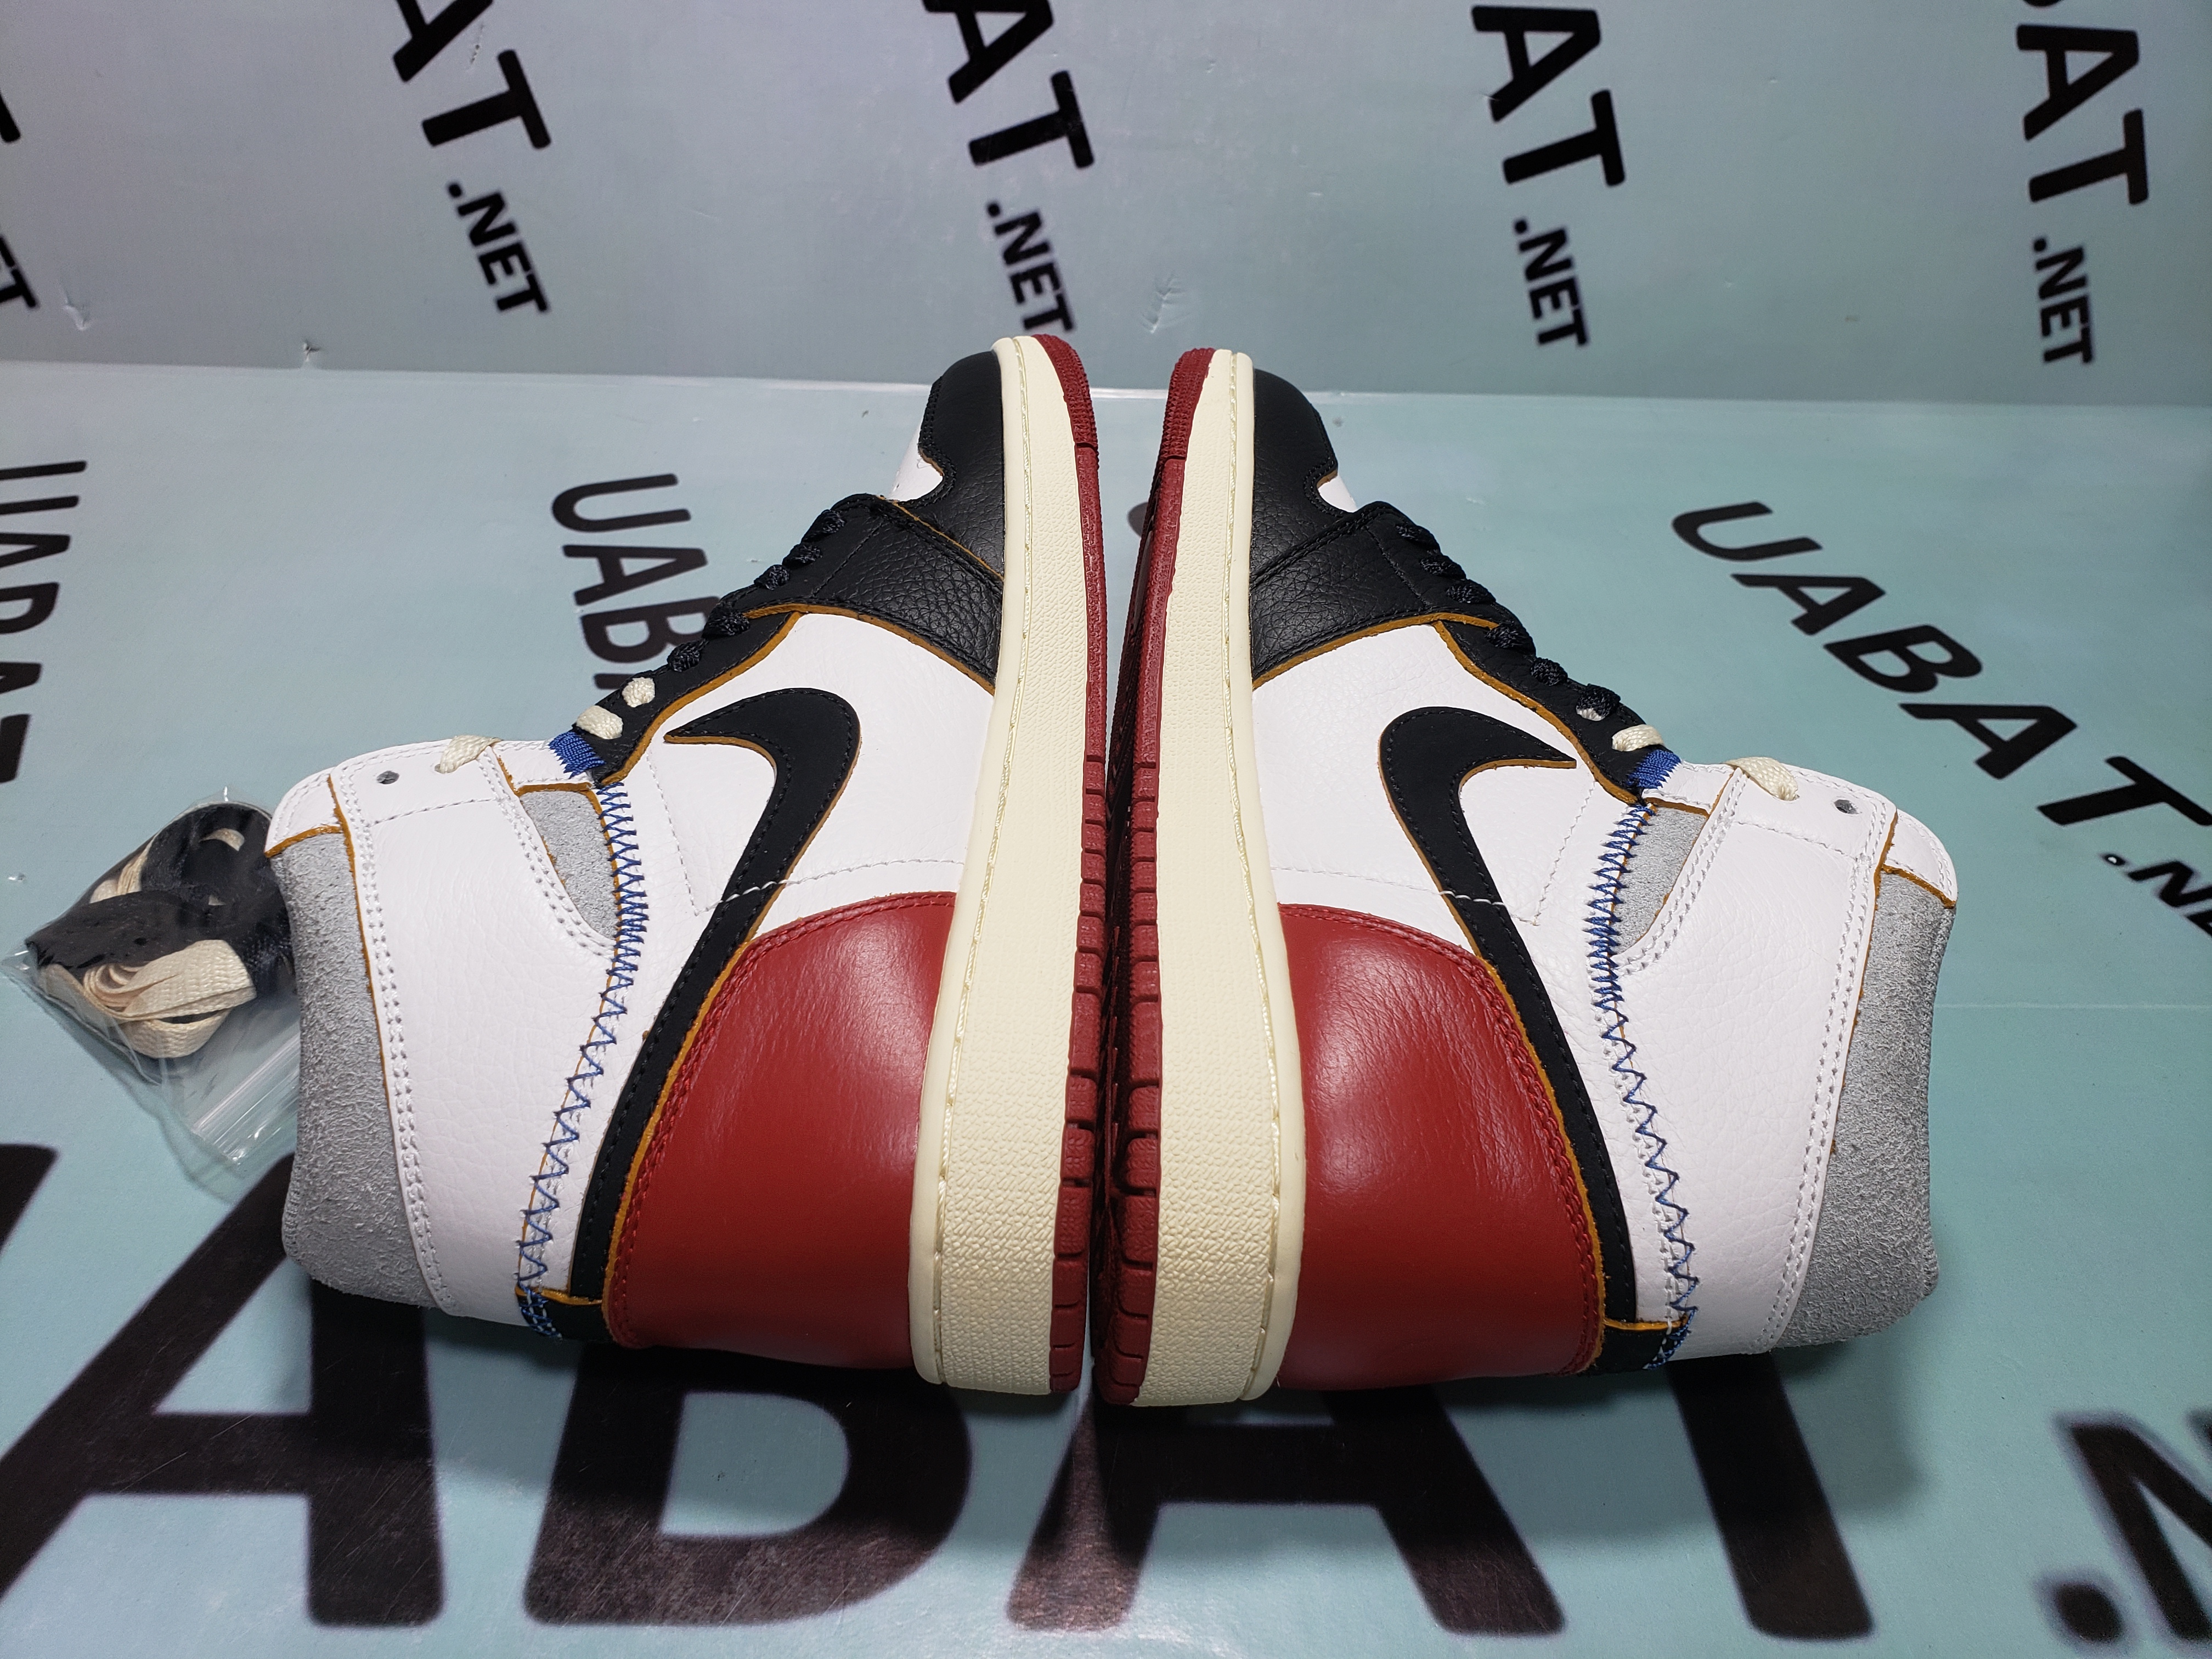 Where To Buy The Air Jordan 1 Low Bred Toe & Resale Value